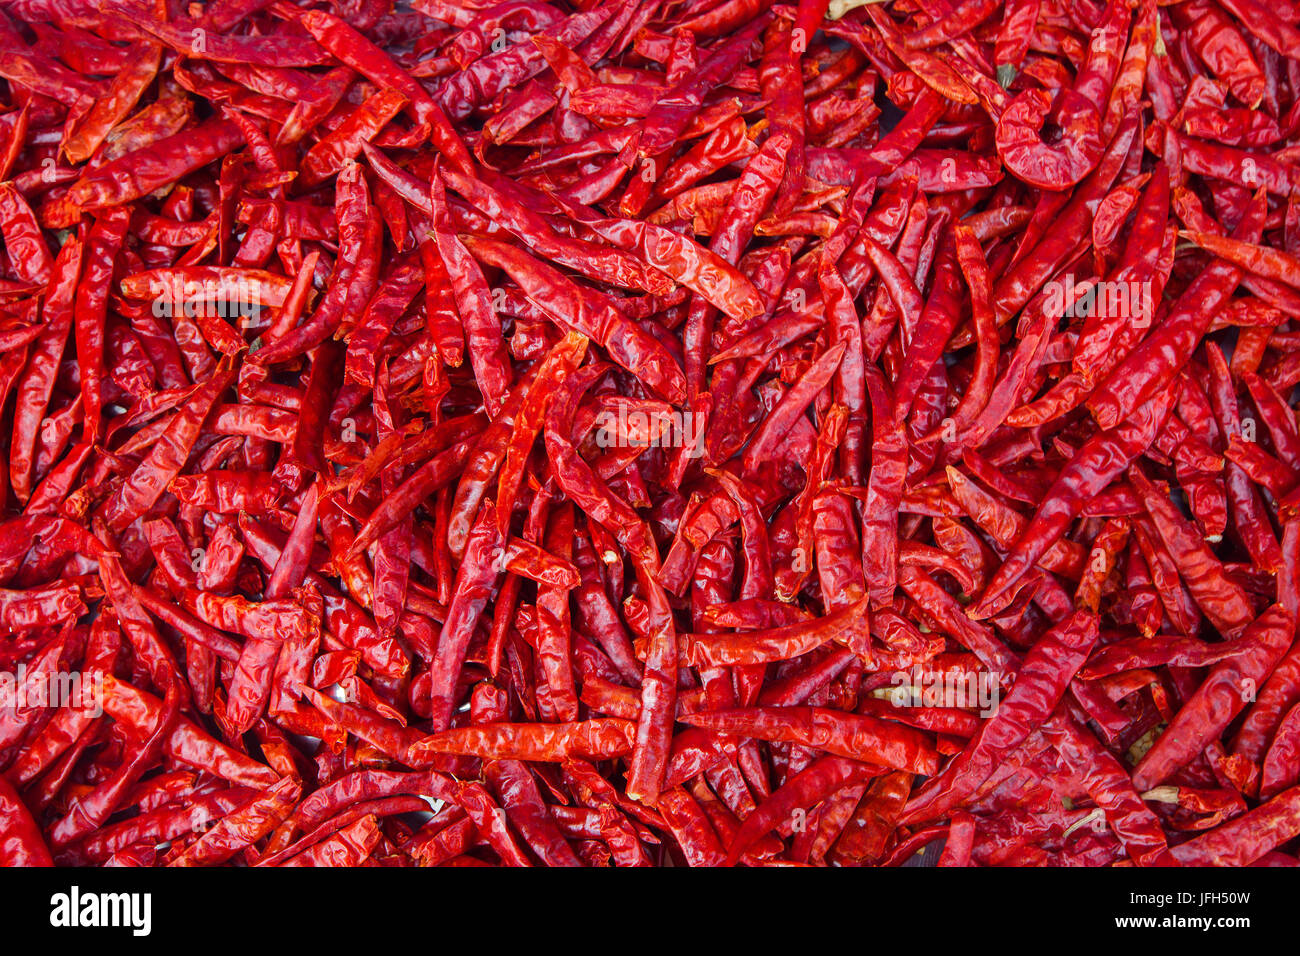 Chilli red peppers Stock Photo